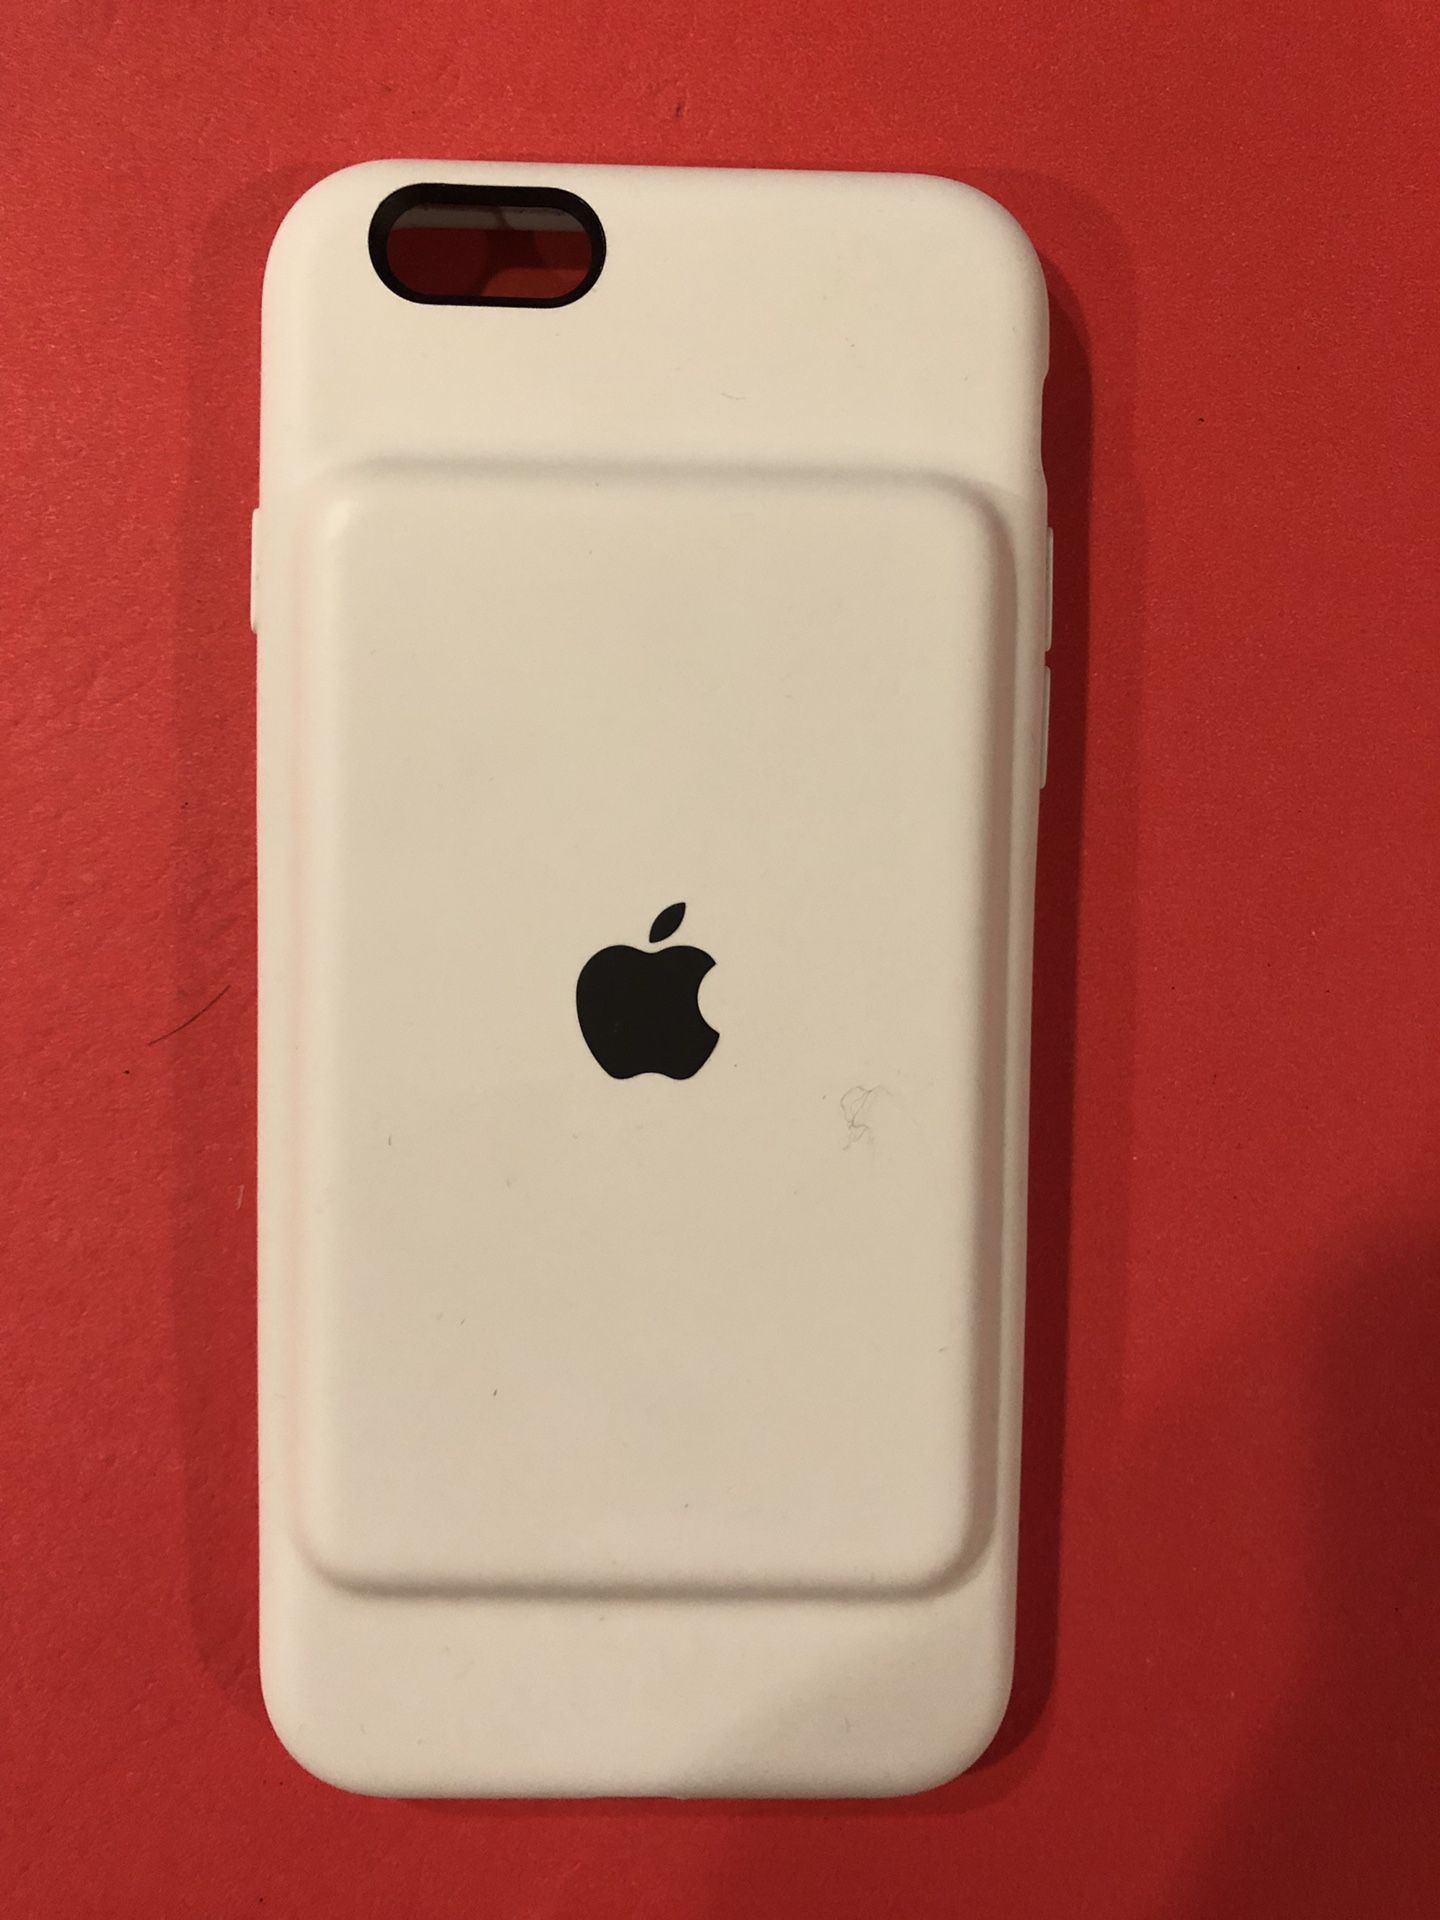 Apple iPhone 6s white charging case